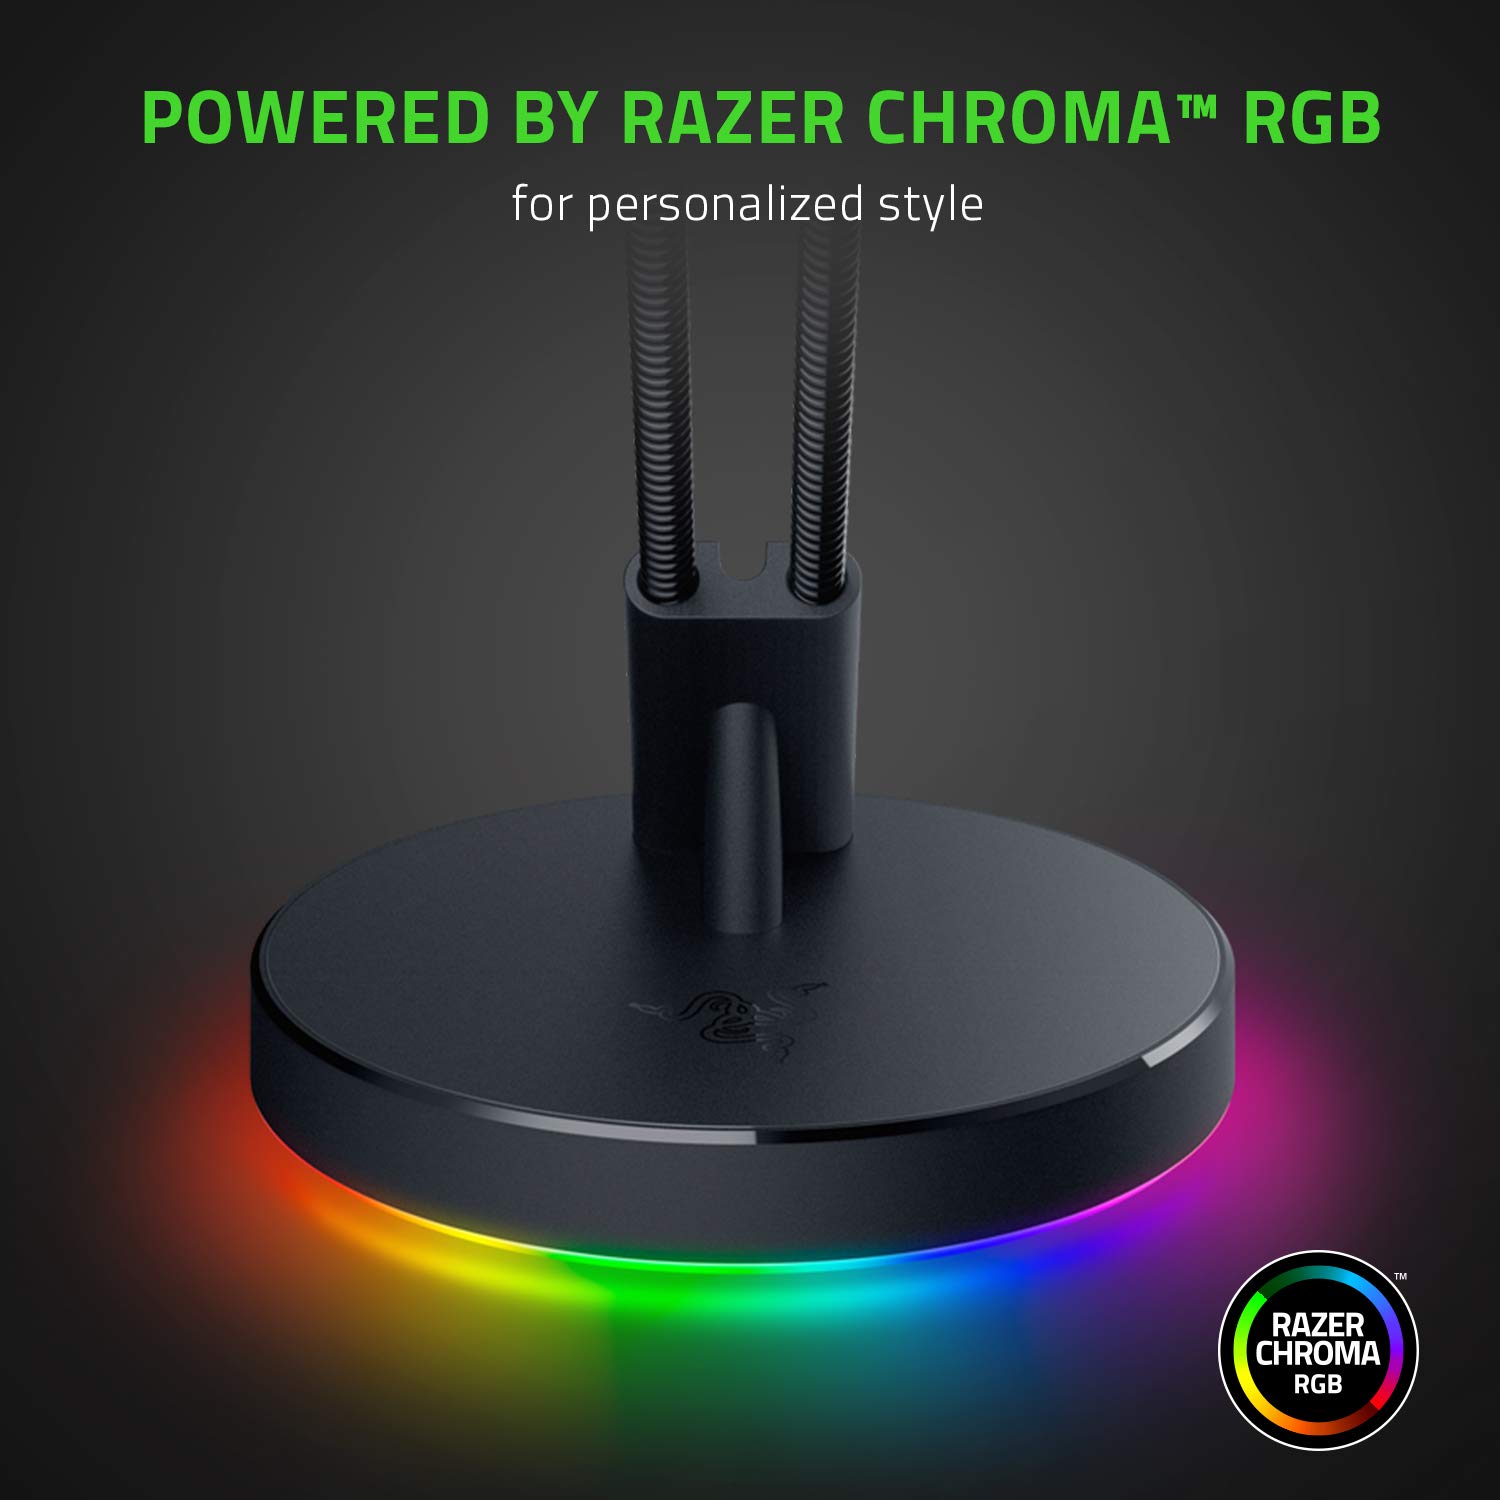 Razer Mouse Bungee V3 Chroma - Mouse Cable Holder with RGB Lighting (Spring Arm with Cable Clip, Heavy Non-Slip Base, Cable Management) Black